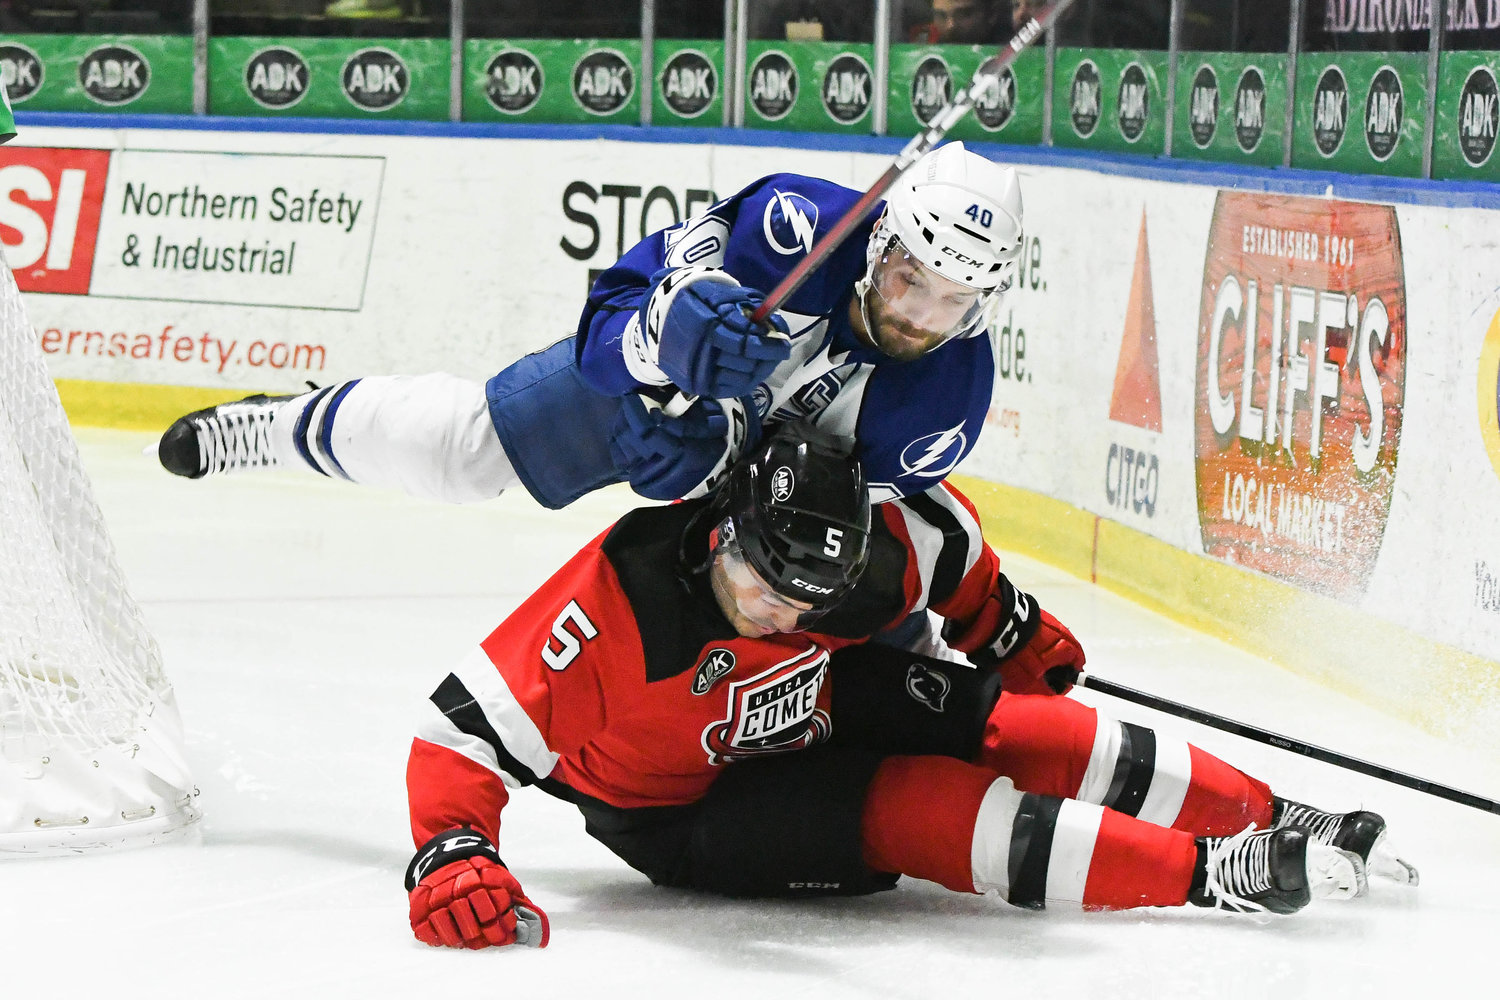 Utica Comets defenseman Robbie Russo (5) is hit near the boards by Syracuse Crunch player Gabriel Dumont (40) during a game last season in Utica. Russo is part of the Comets’ defense this season while Dumont hasn’t played since suffering an injury during the first week of this season, according to the Crunch.